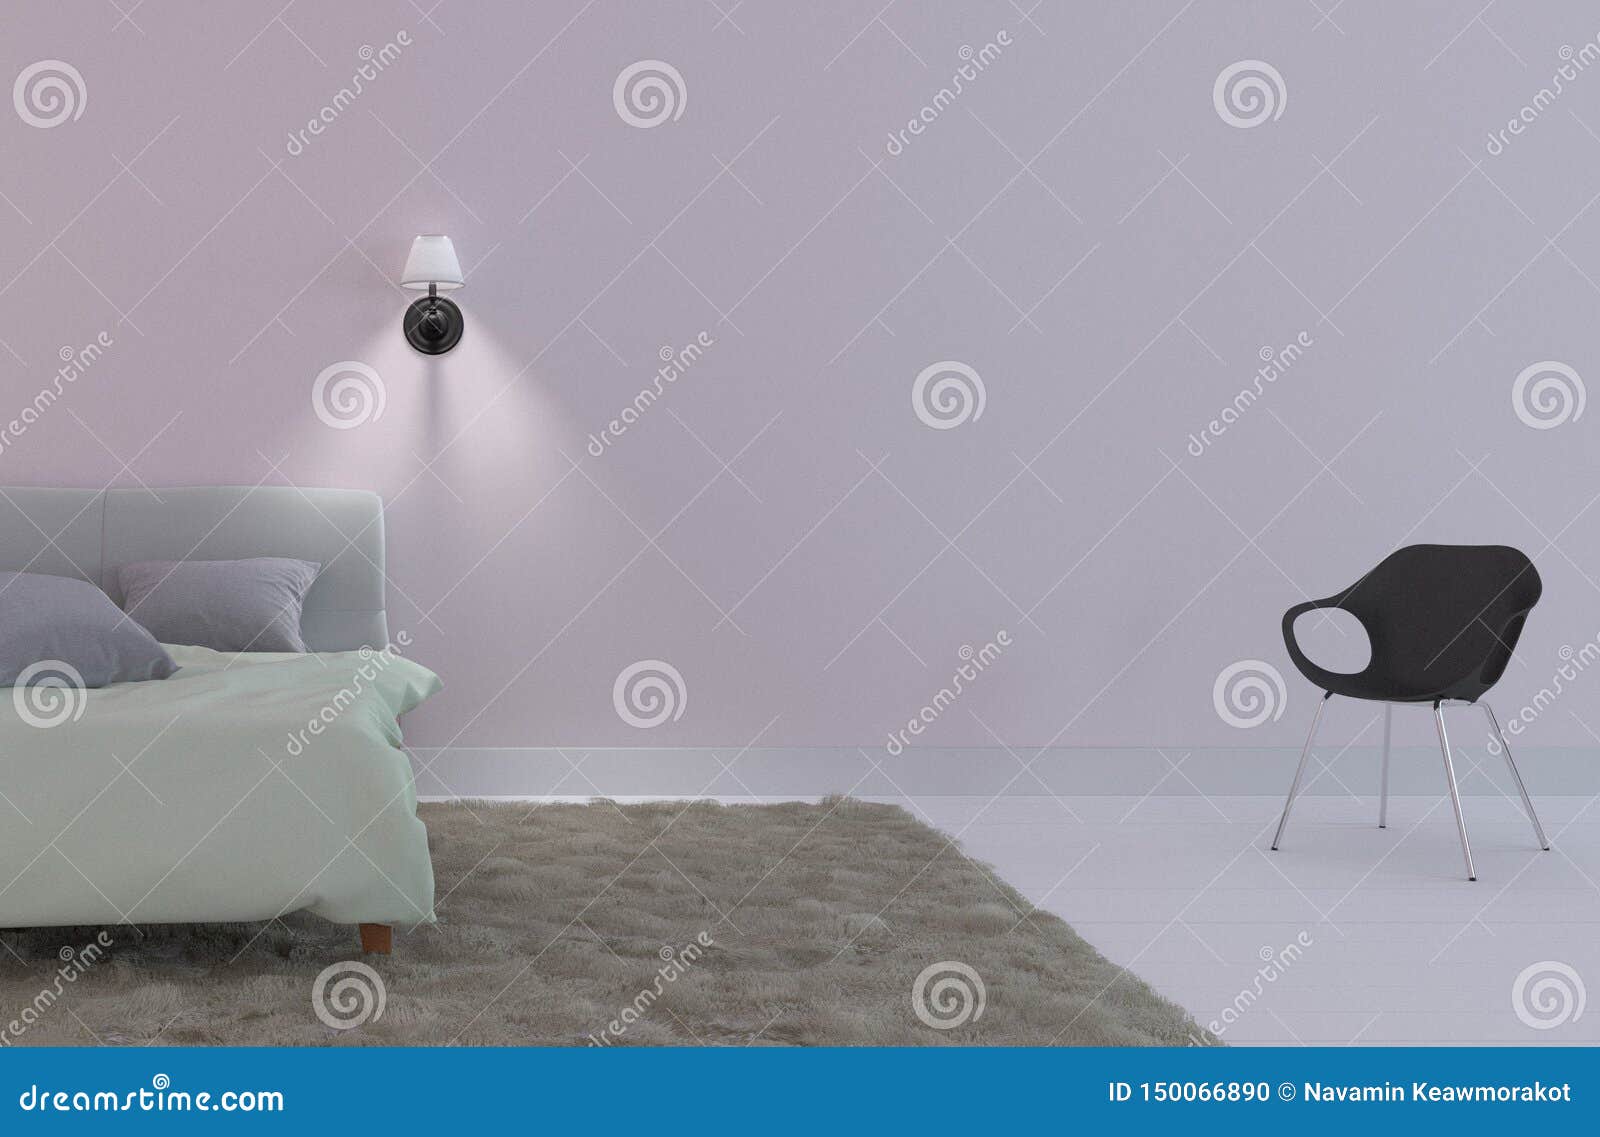 bed room interior - elegent style with chair and lamp, white floor empty white wall background. 3d rendering